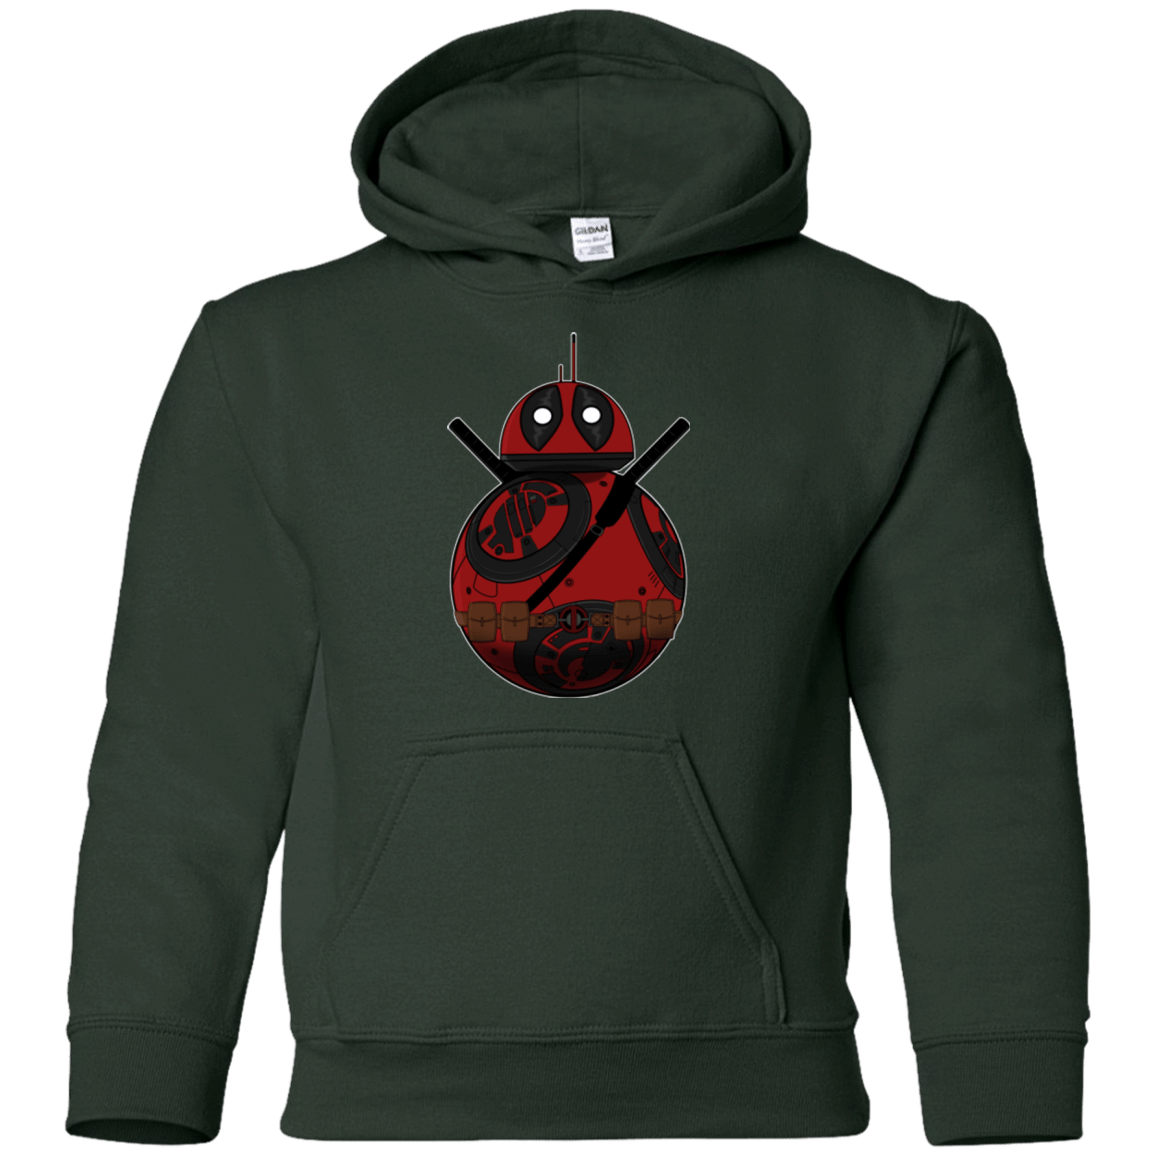 Sweatshirts Forest Green / YS DP8 Youth Hoodie